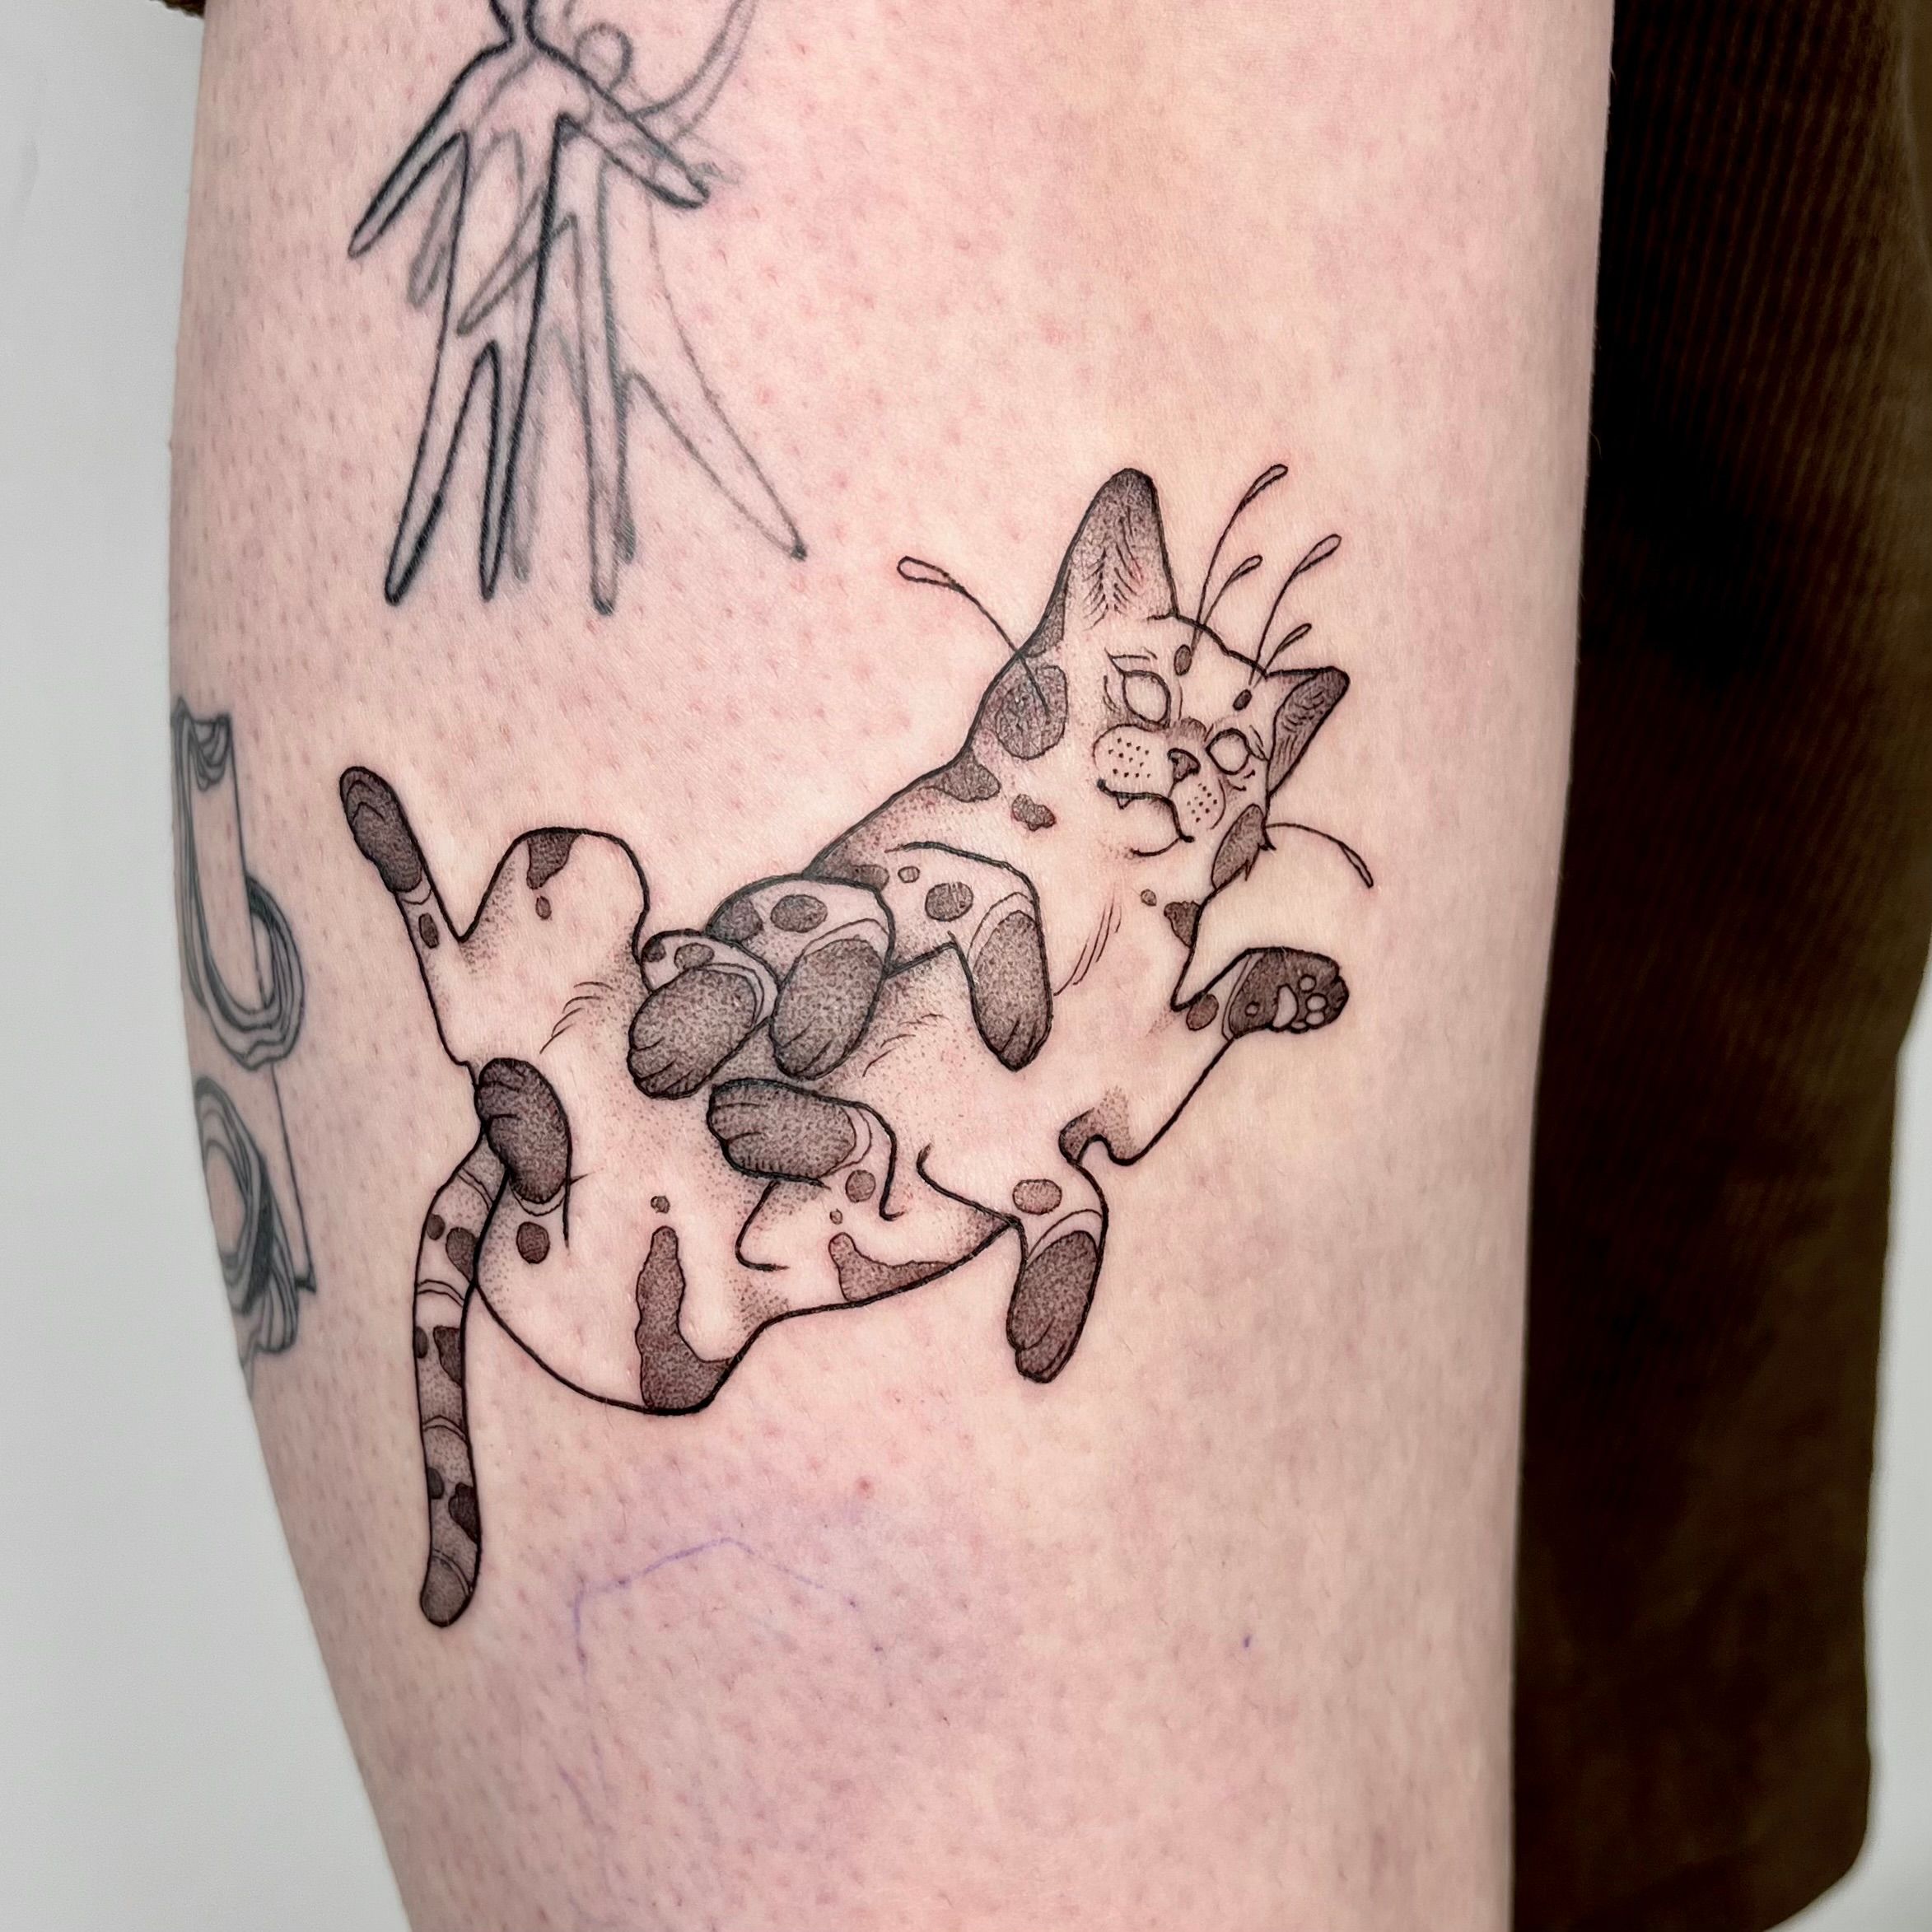 Tattoo tagged with: cat, japanese, mask, skull, food | inked-app.com